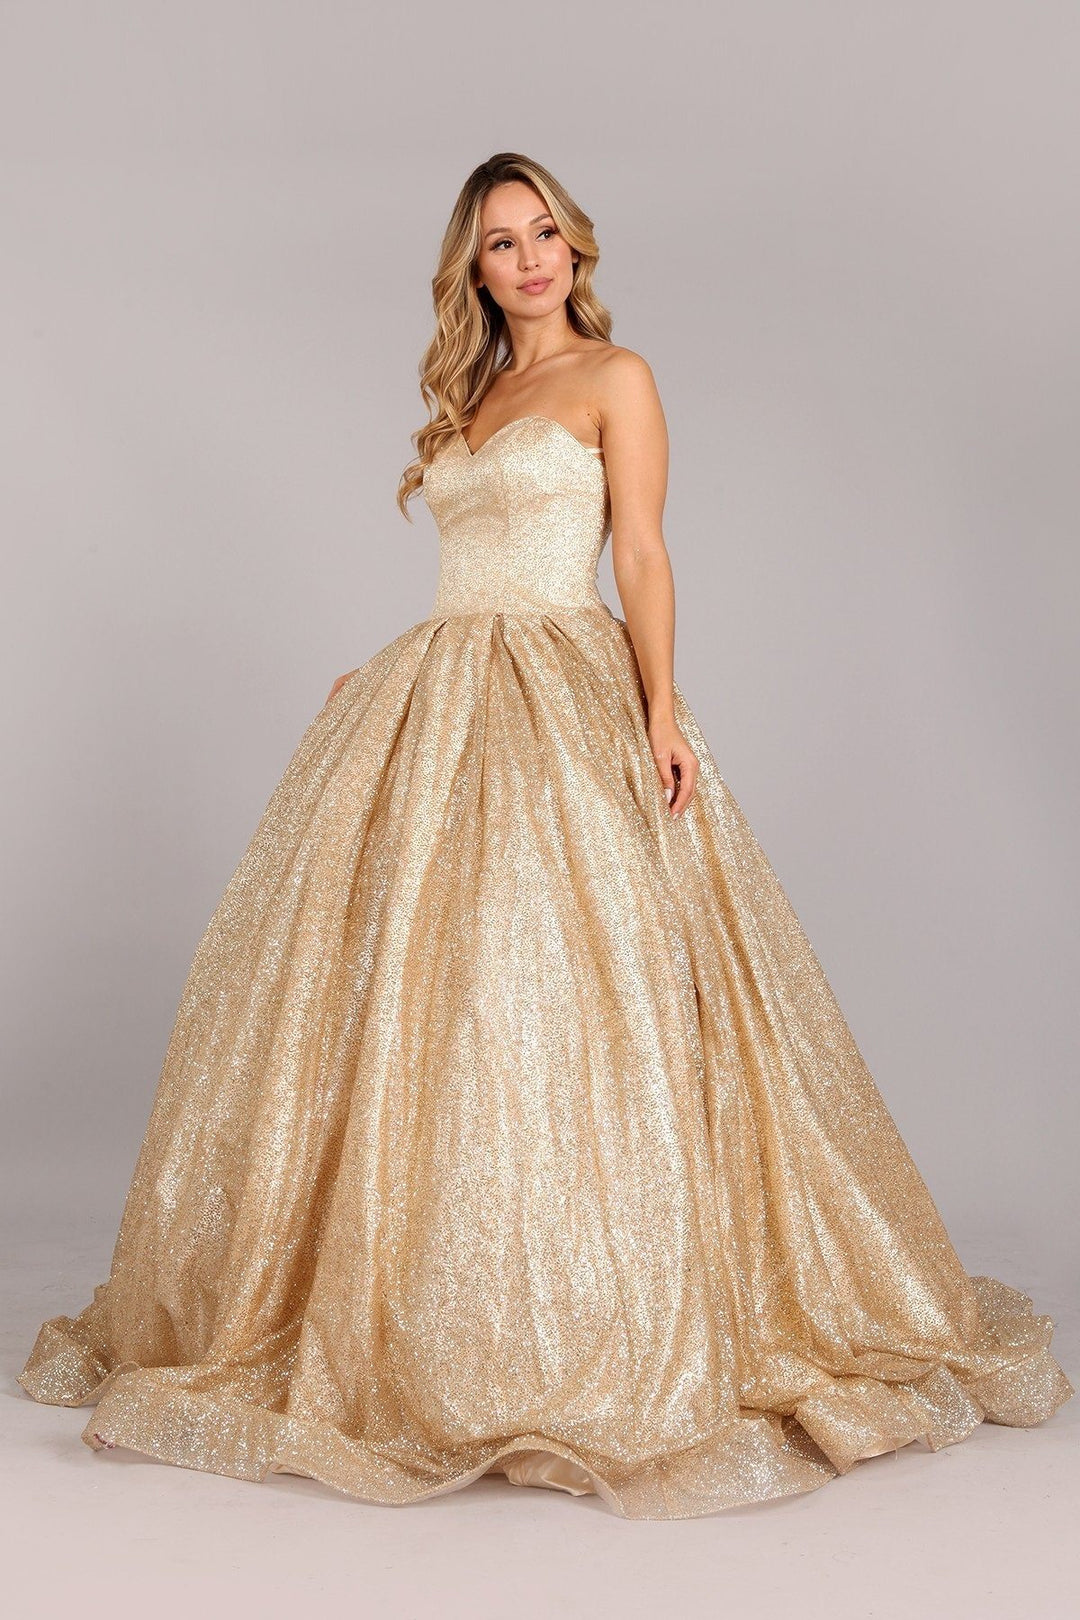 Gold Glitter Strapless Ball Gown by Cinderella Couture